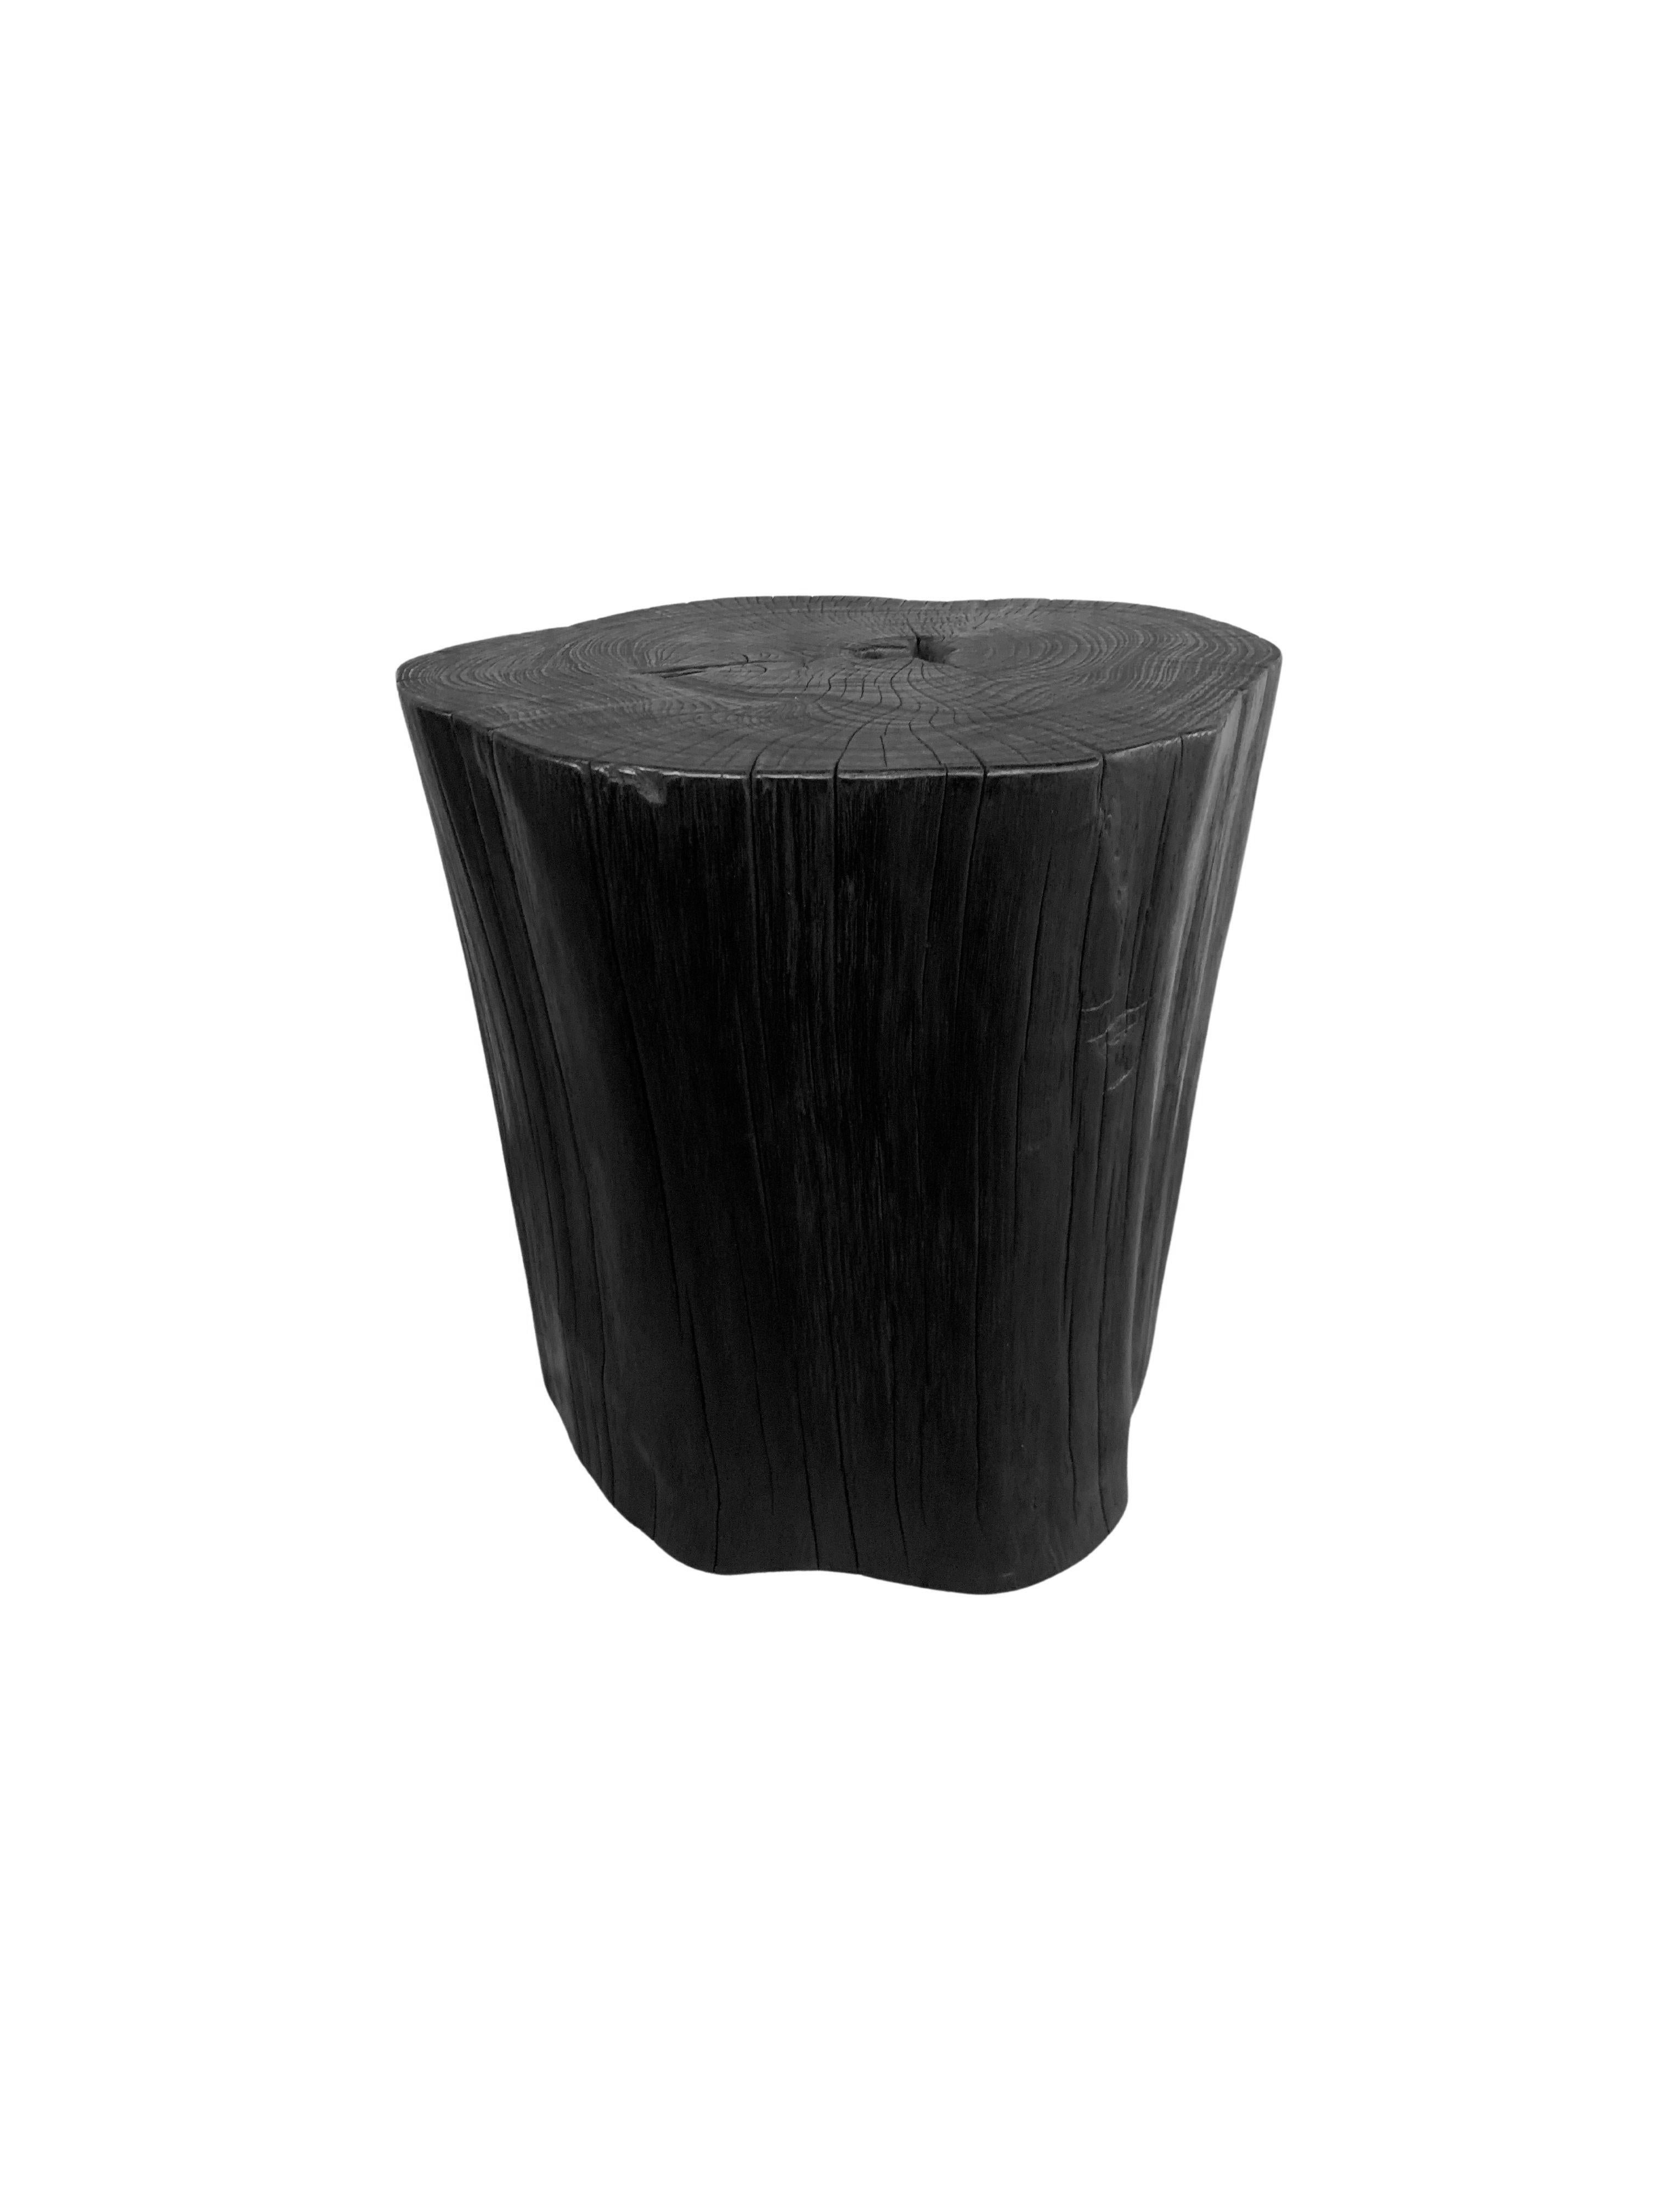 A wonderfully organic round side table. Its neutral pigment and subtle wood texture makes it perfect for any space. This table was crafted from a solid trunk of teak wood. To achieve its pigment the wood was burnt numerous times and then finished